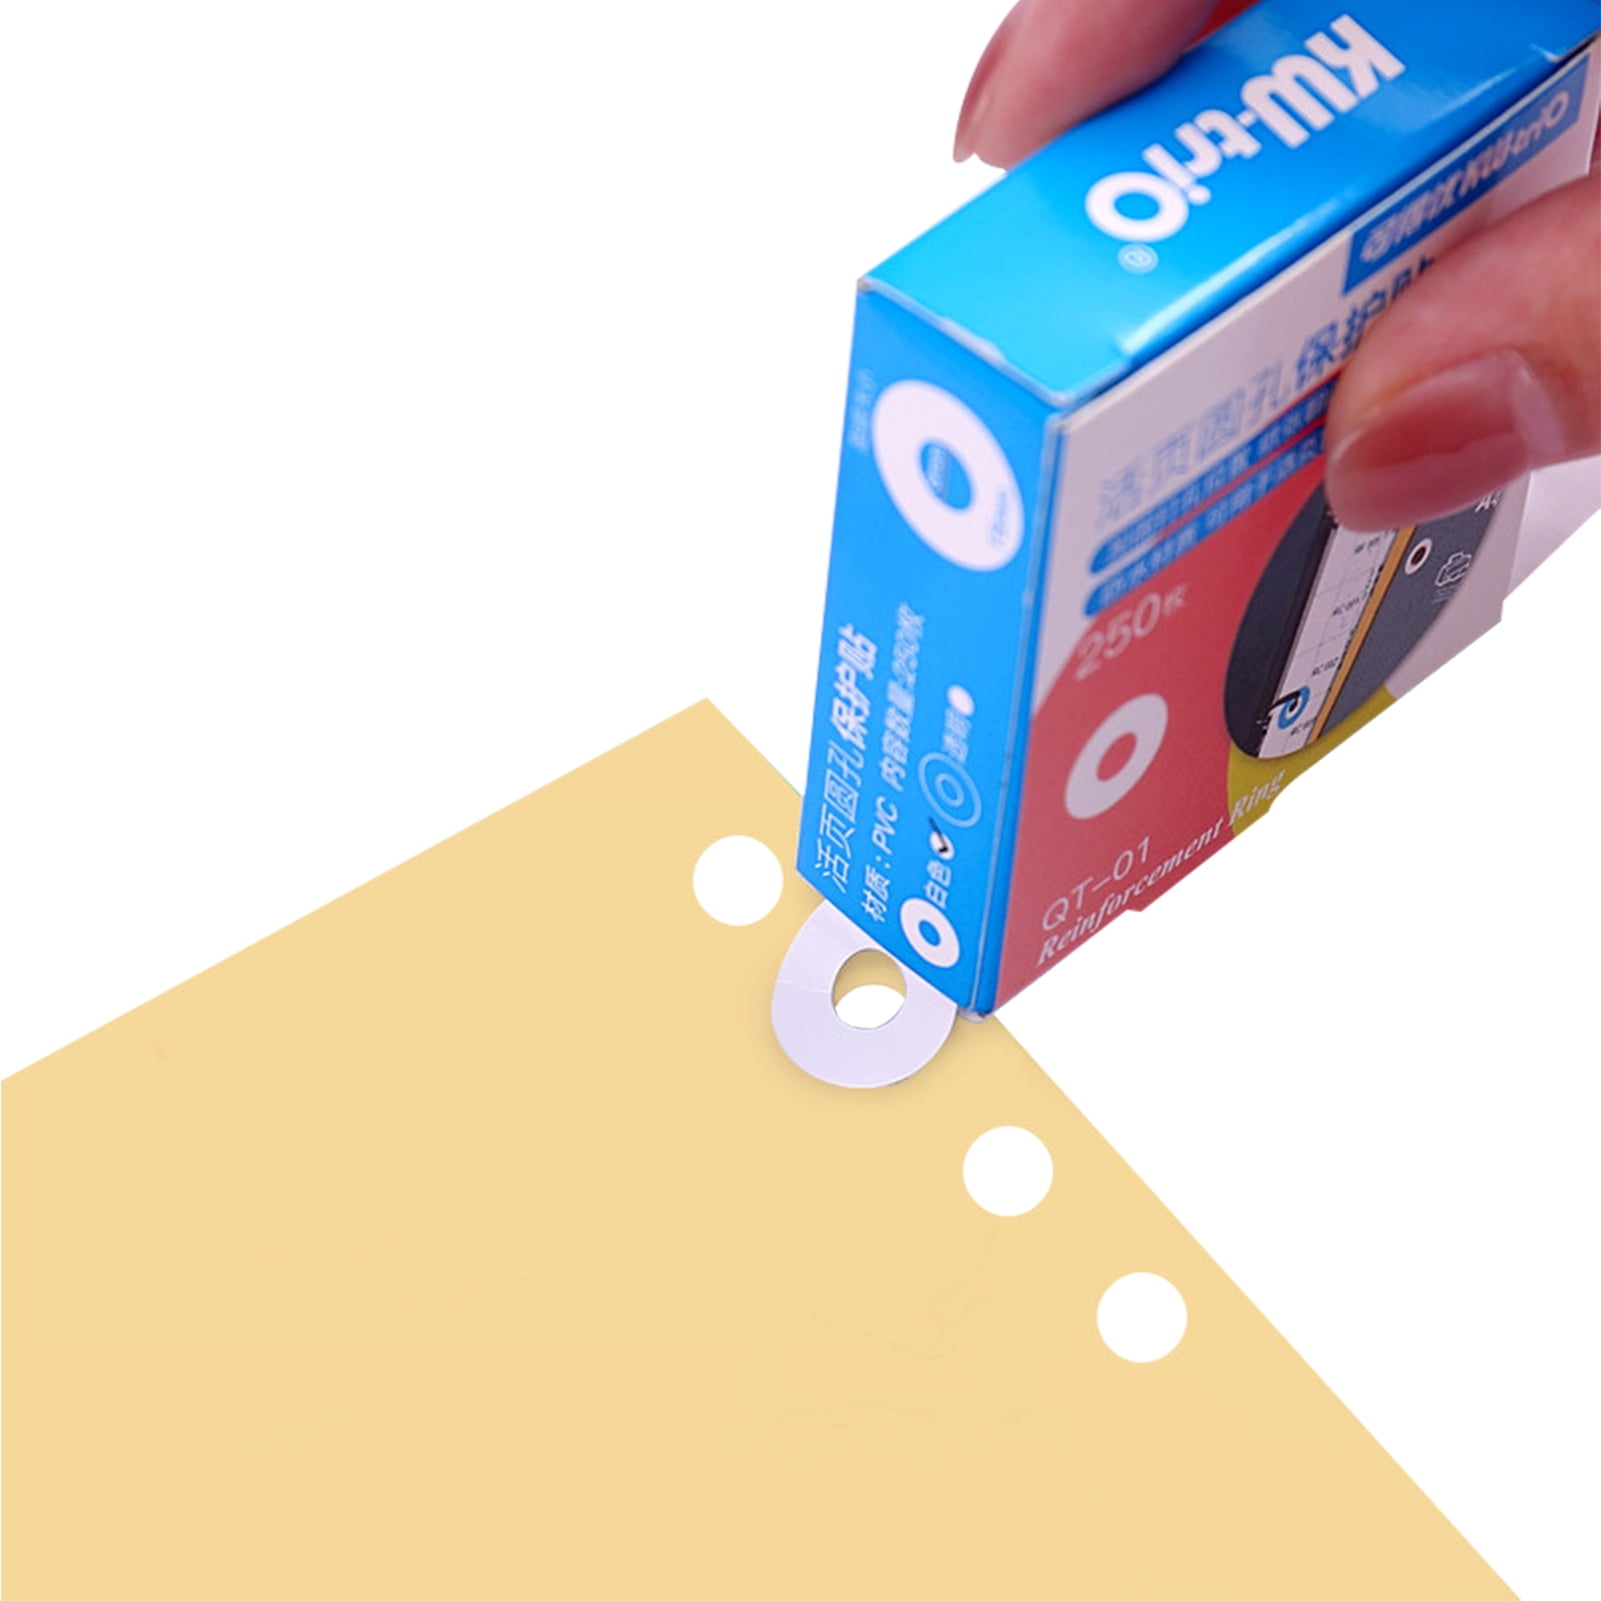 The Teachers' Lounge®  Paper Hole Reinforcements, Self-Adhesive